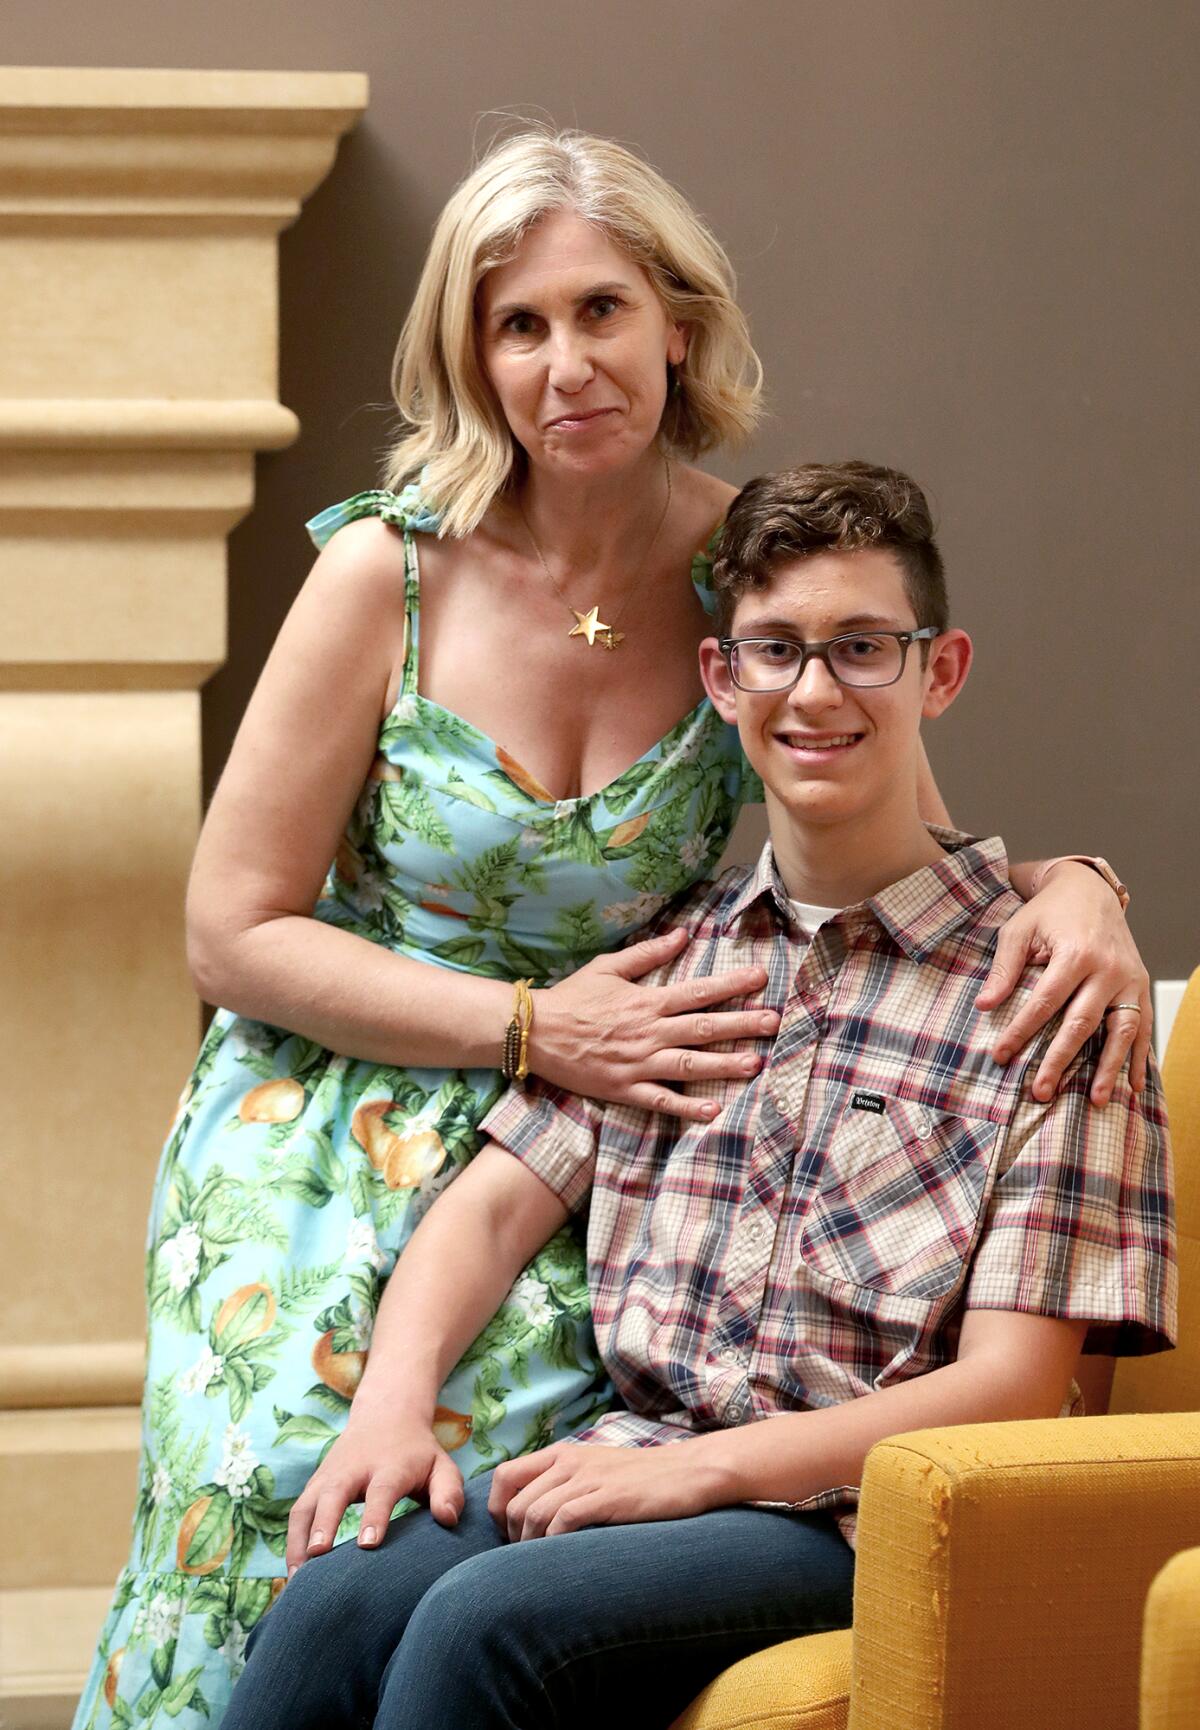 Huntington Beach High School junior Colin Parrott, 16, and his mother, Debbi, pose for a portrait at their home.